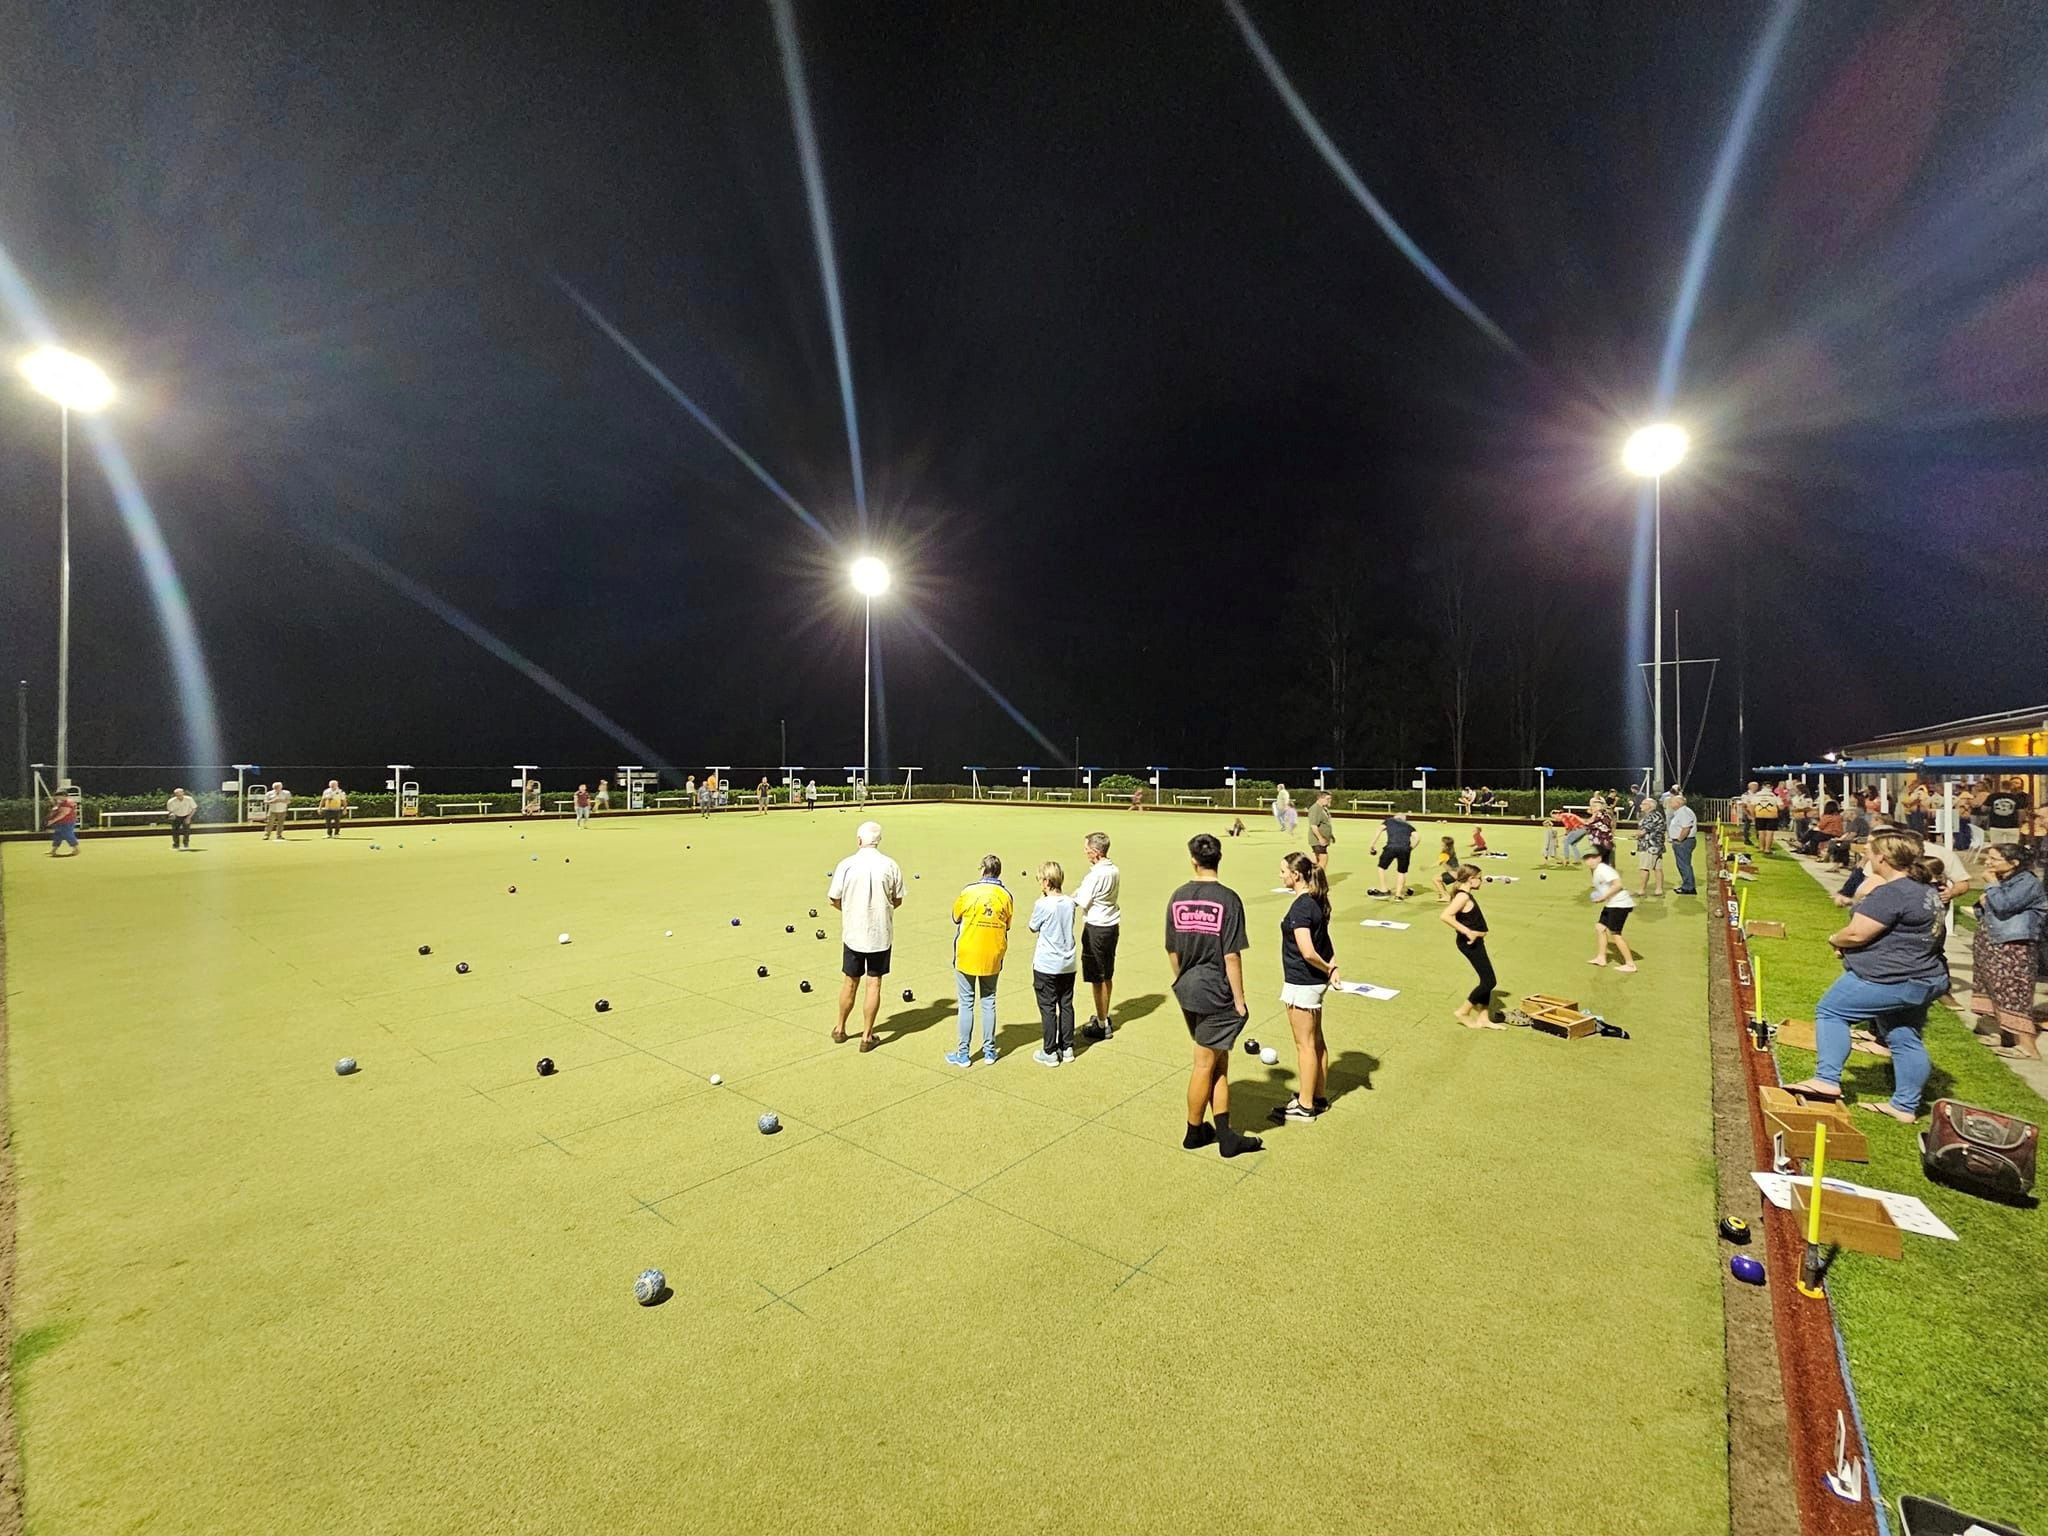 The new floodlights were well received at the Woodford Bowls Club.